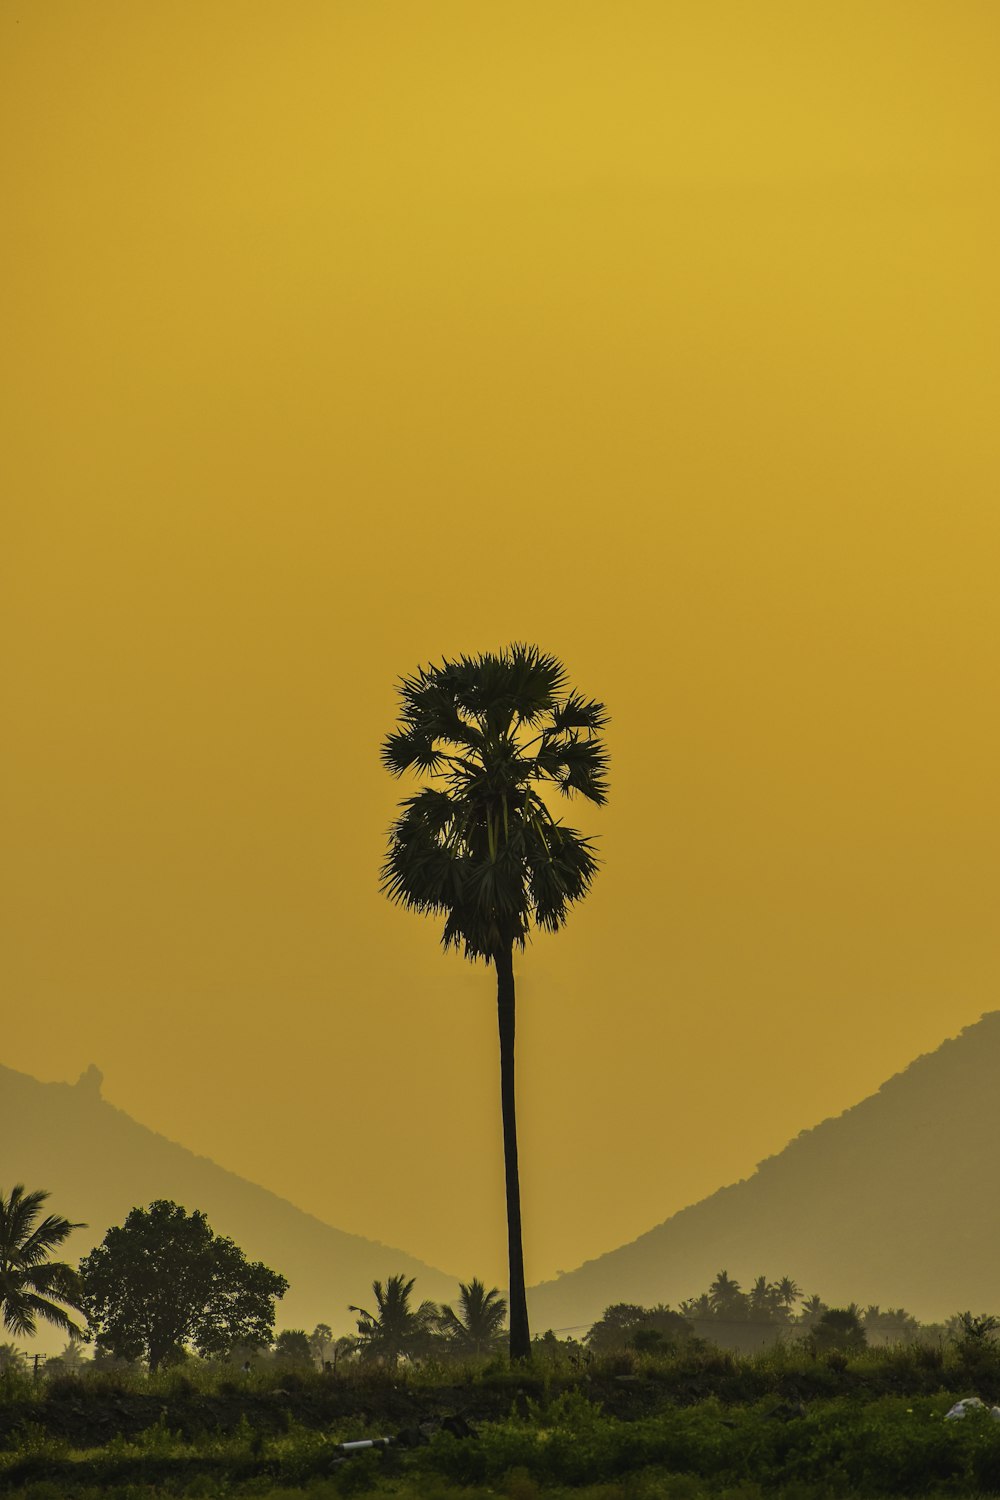 a lone palm tree in a field with mountains in the background